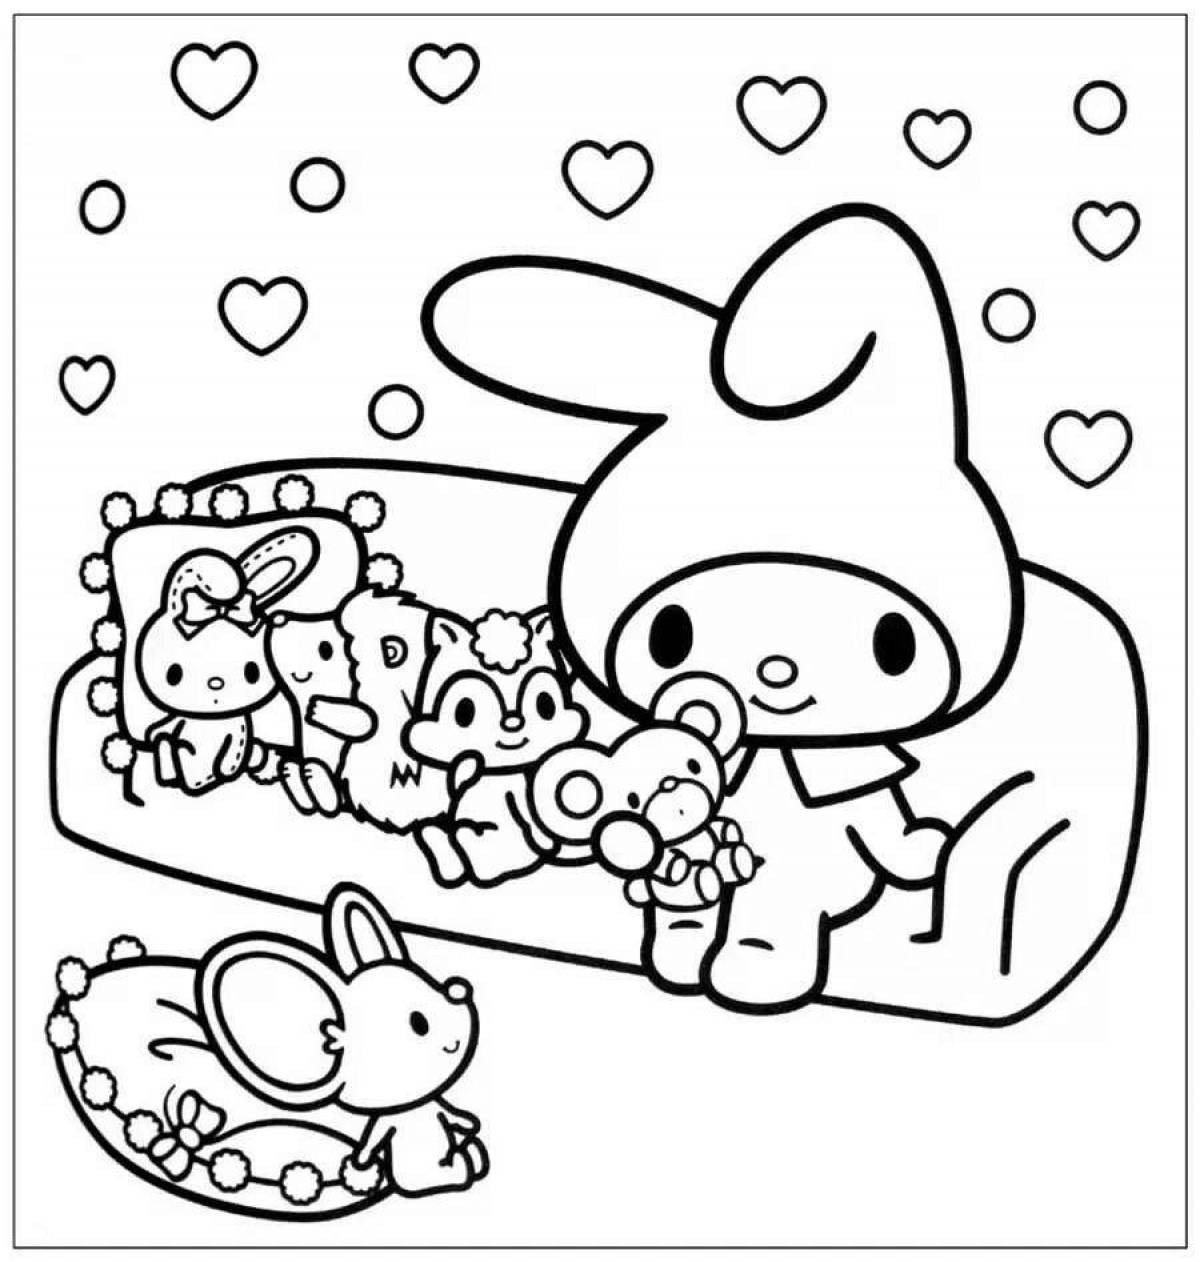 Kuromi colored seal coloring page